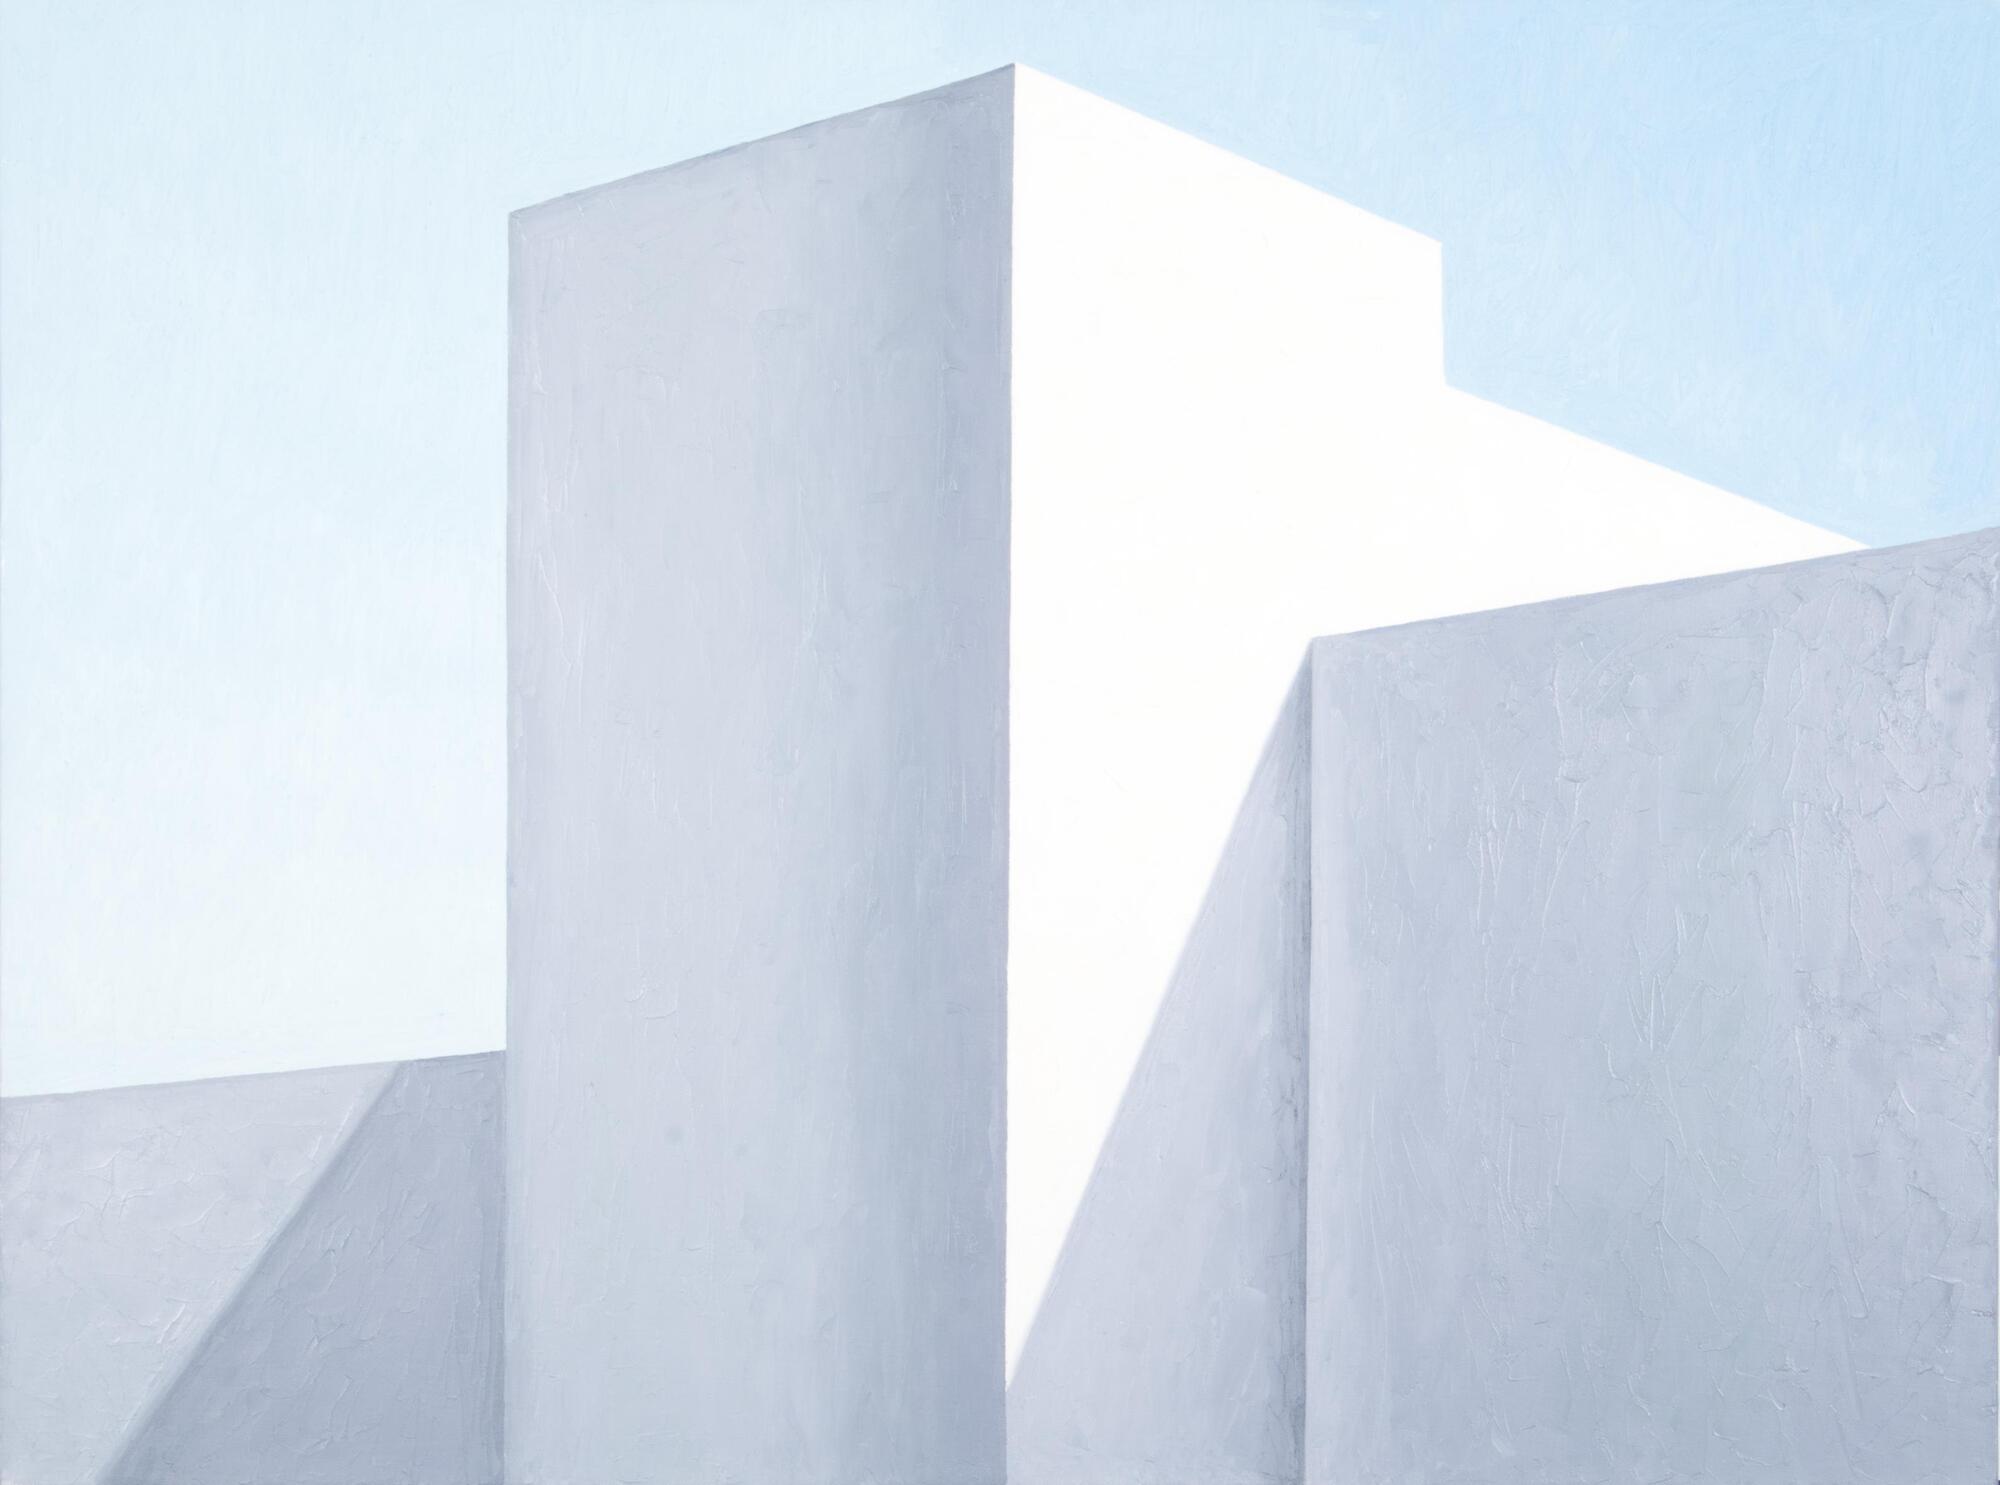 An abstract oil painting of a blank, windowless building.